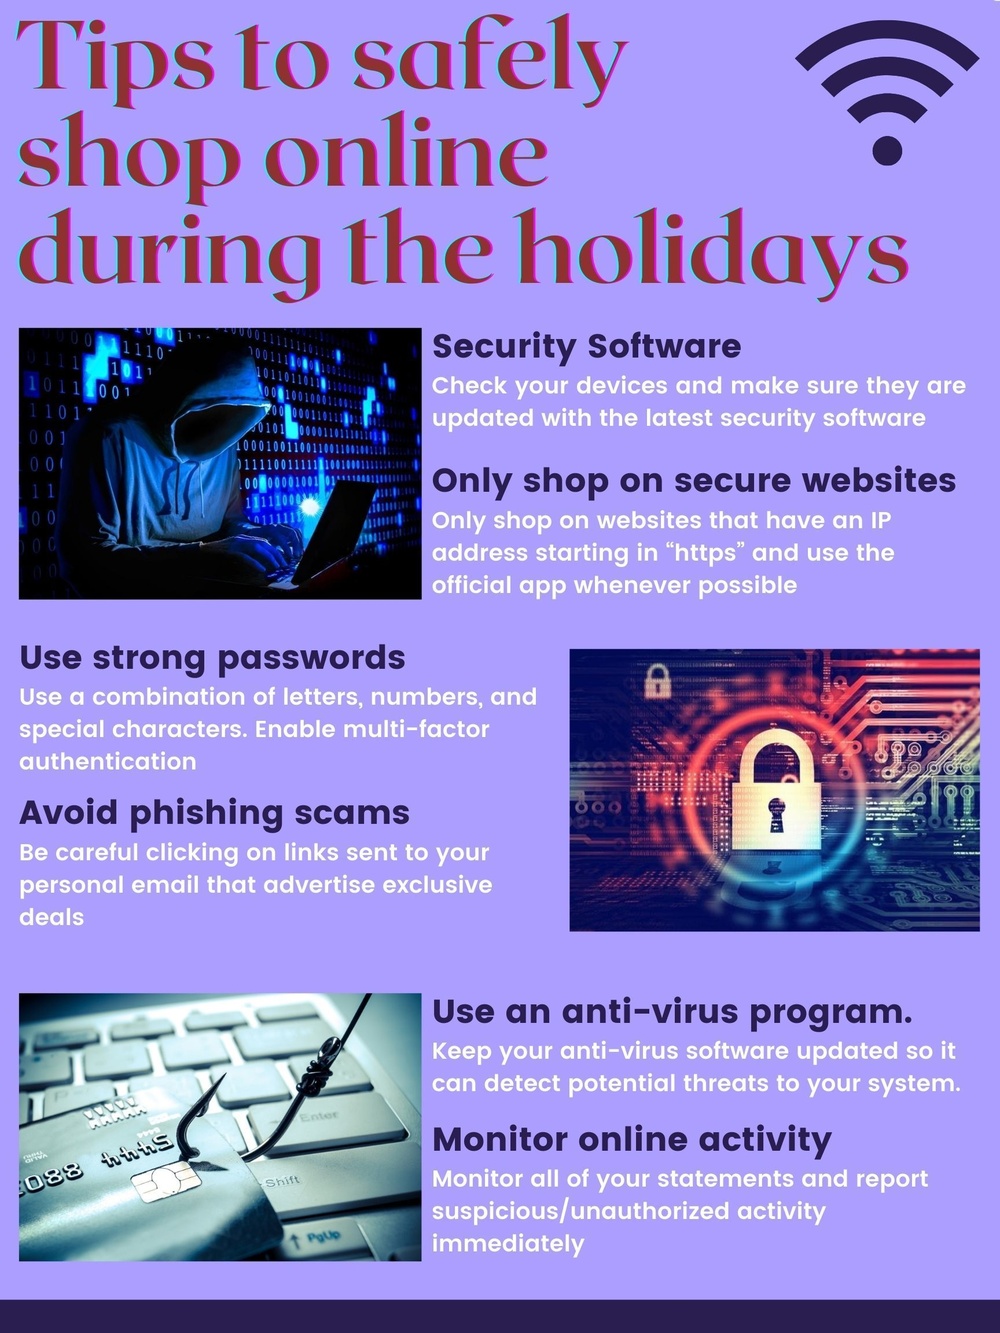 DVIDS - News - Tis the season to be jolly: Don't let hackers ruin